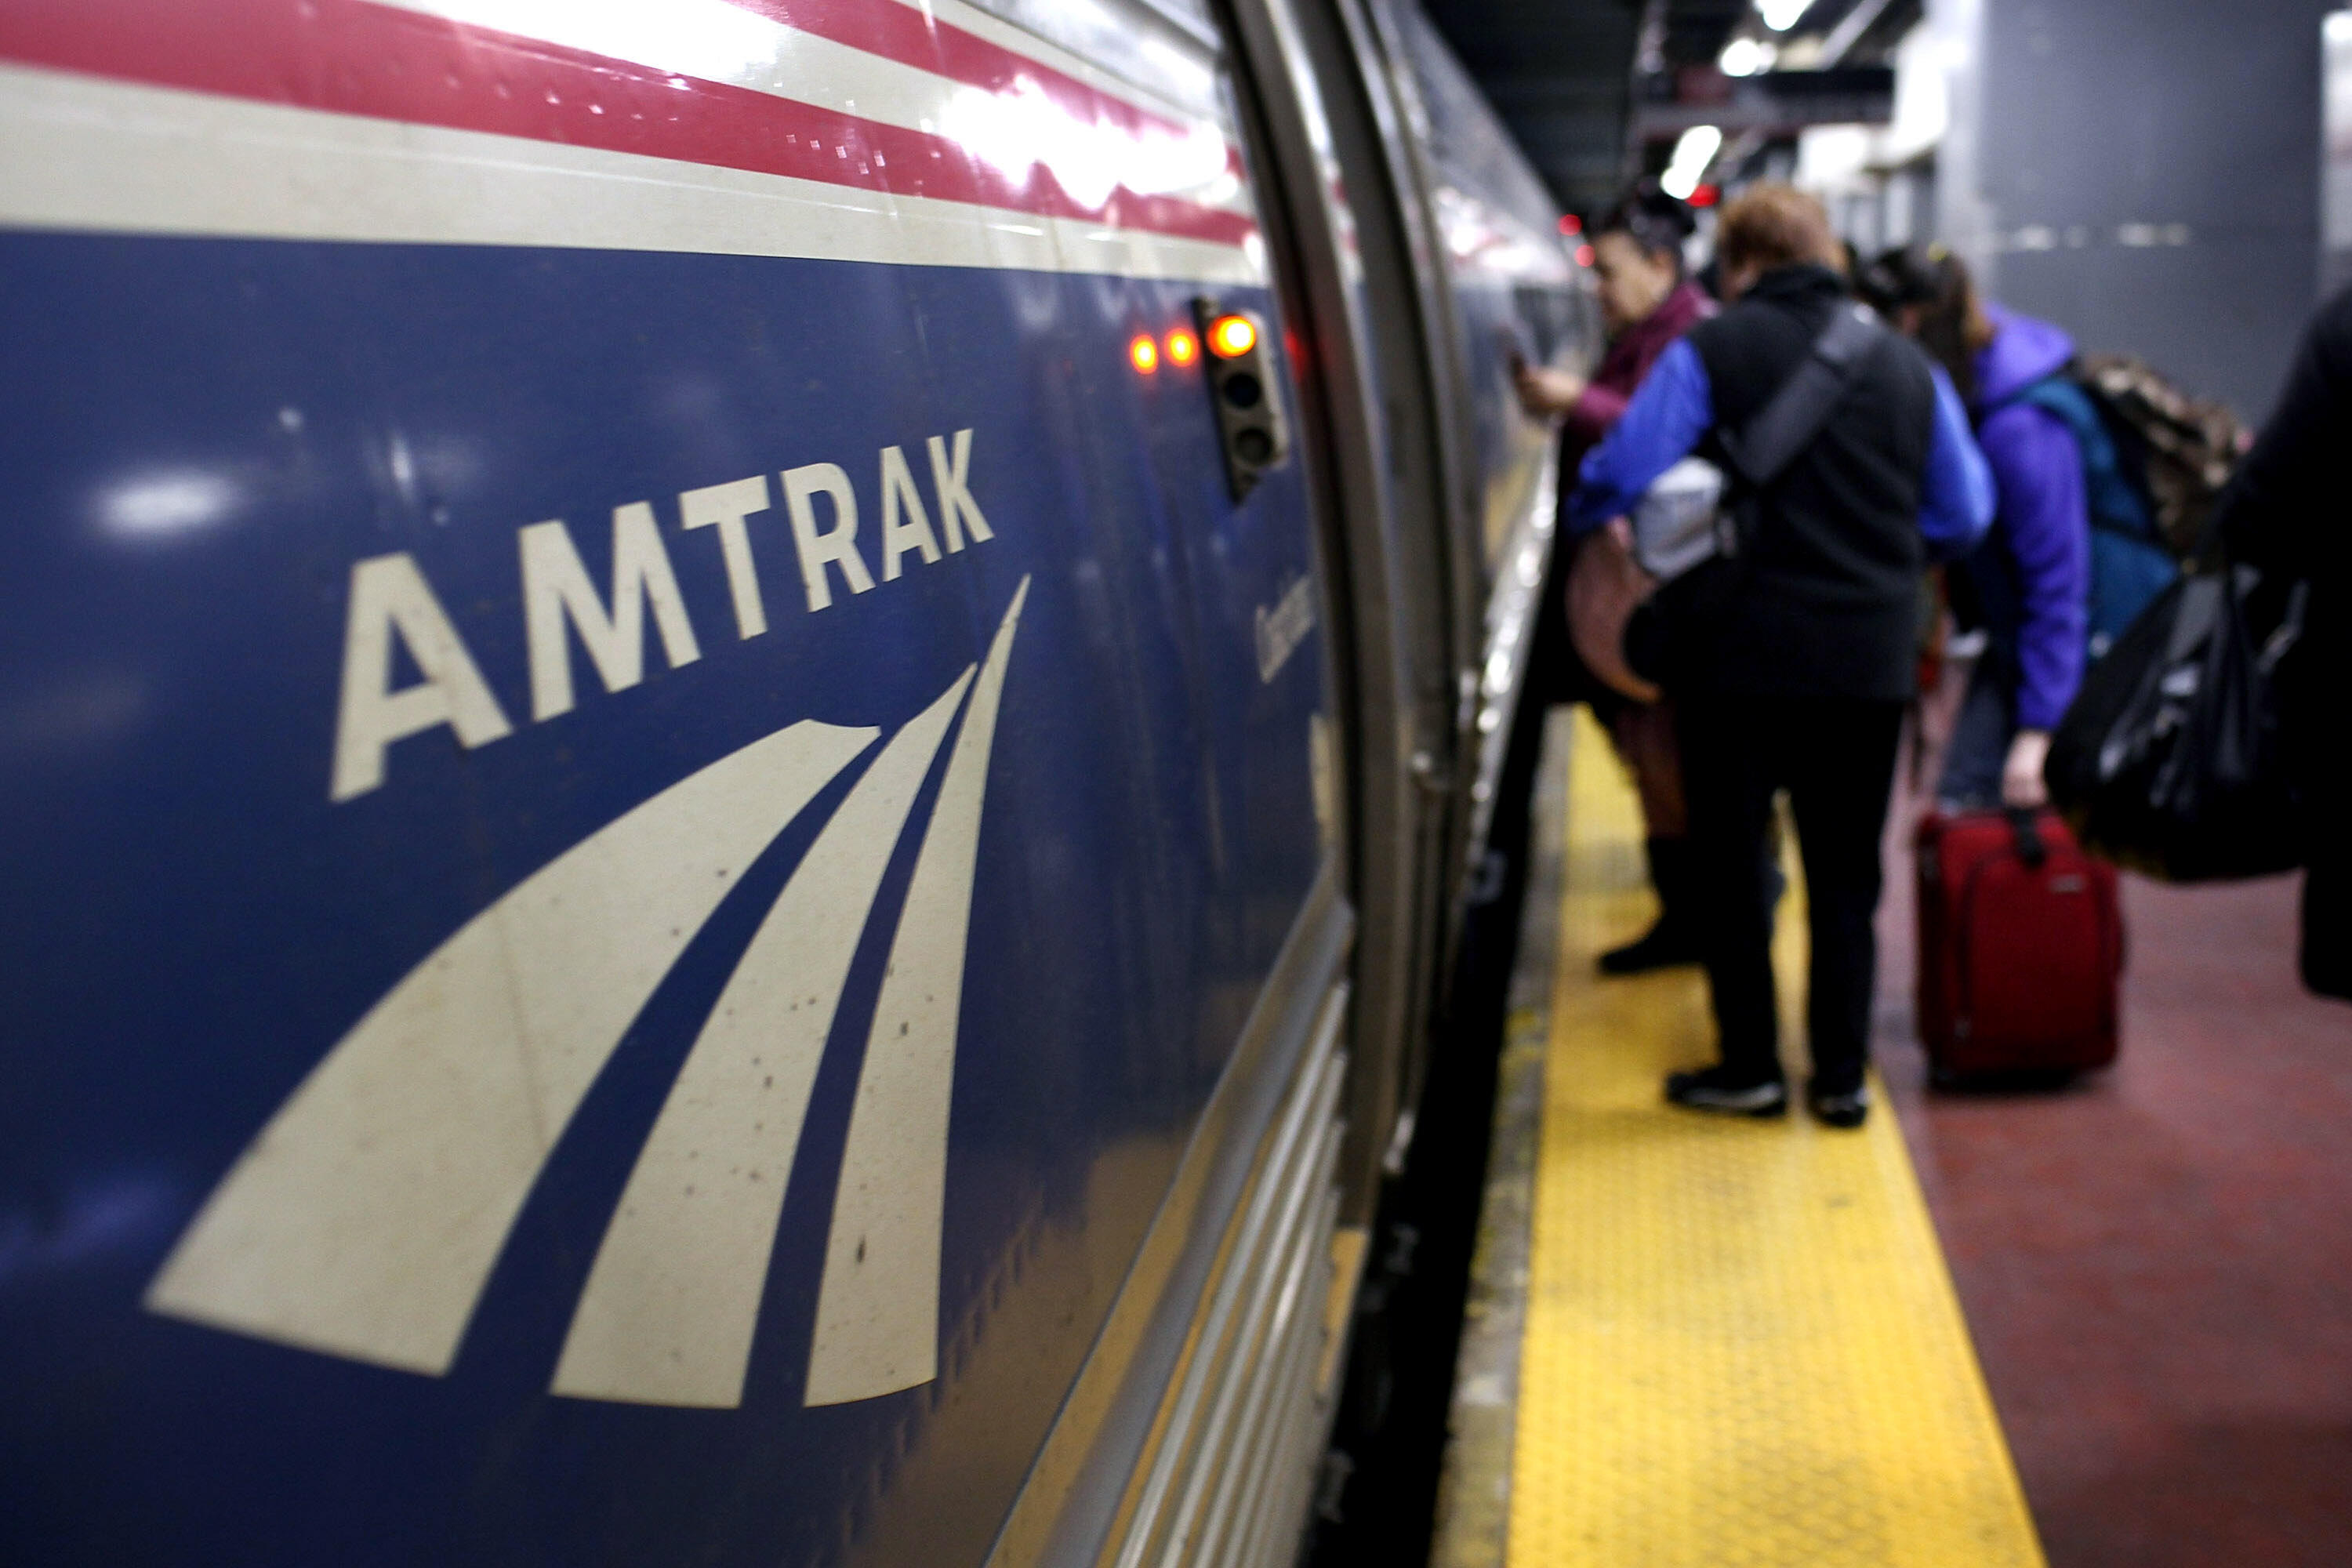 NEW YORK, NY - FEBRUARY 08:  People board an Amtrak train on February 8, 2011 at Penn Station in New York City. Amtrak, a government-owned corporation, has joined up with New Jersey's two U.S. senators to propose a new rail link to New York City under the Hudson River. The 